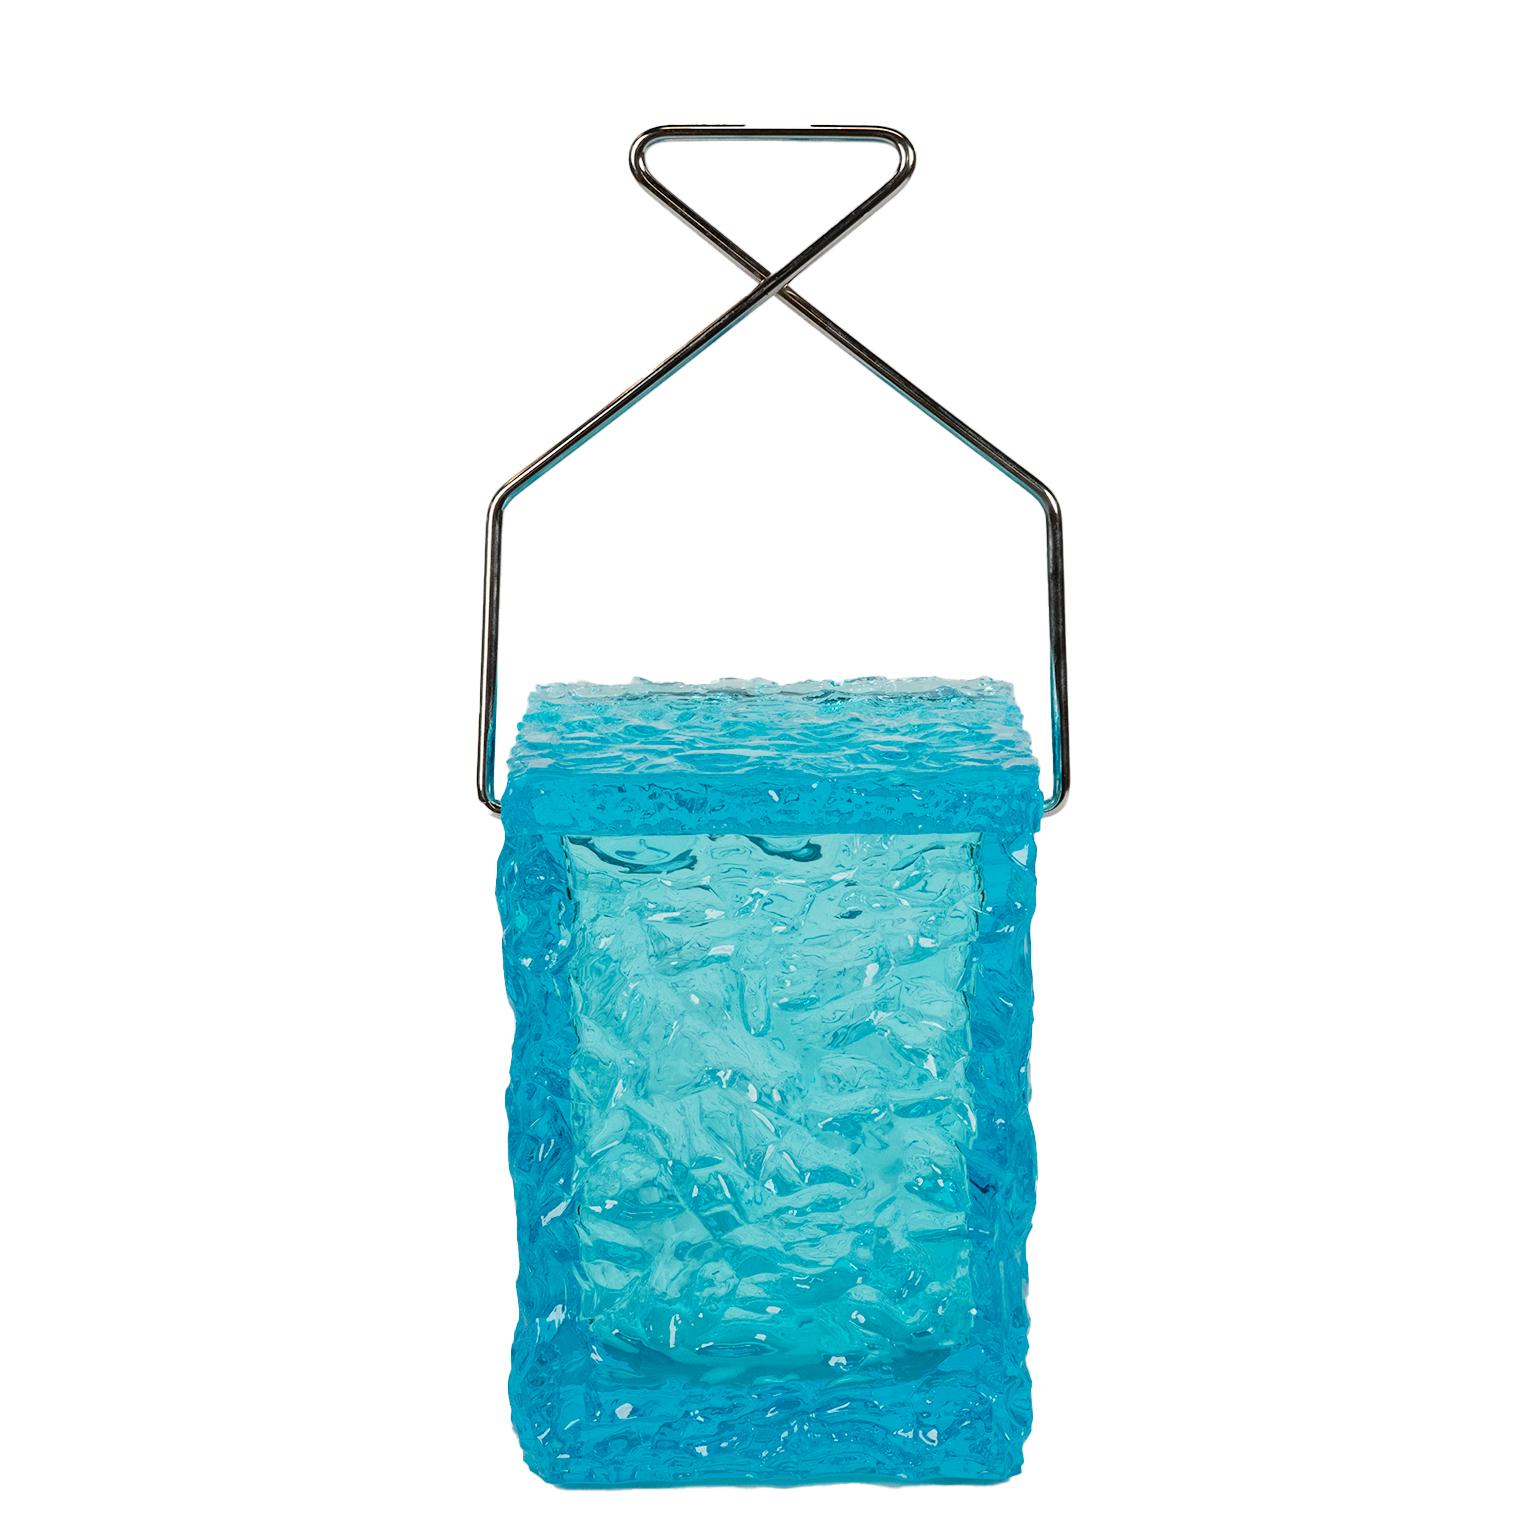 This is a rare vibrant turquoise blue “ice cube “ ice bucket with textured details and a handle in the shape of a ice pick. If you love the colour blue, entertaining and something a little different then this is a great bar accessory for all